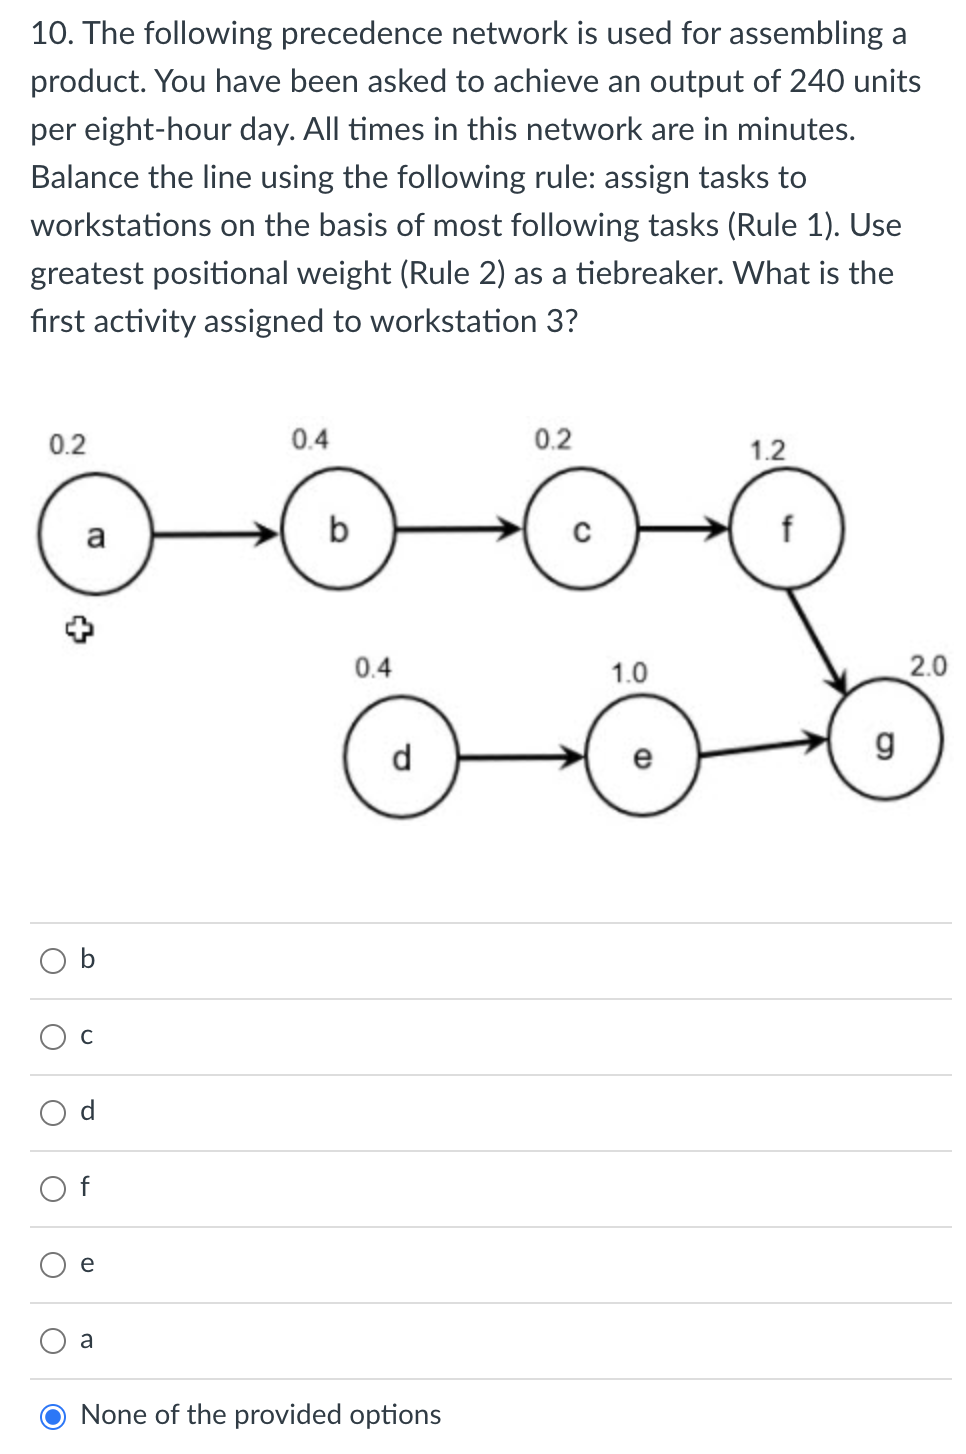 10. The following precedence network is used for assembling a
product. You have been asked to achieve an output of 240 units
per eight-hour day. All times in this network are in minutes.
Balance the line using the following rule: assign tasks to
workstations on the basis of most following tasks (Rule 1). Use
greatest positional weight (Rule 2) as a tiebreaker. What is the
fırst activity assigned to workstation 3?
0.2
0.4
0.2
1.2
a
b
0.4
1.0
2.0
d
C
a
None of the provided options
